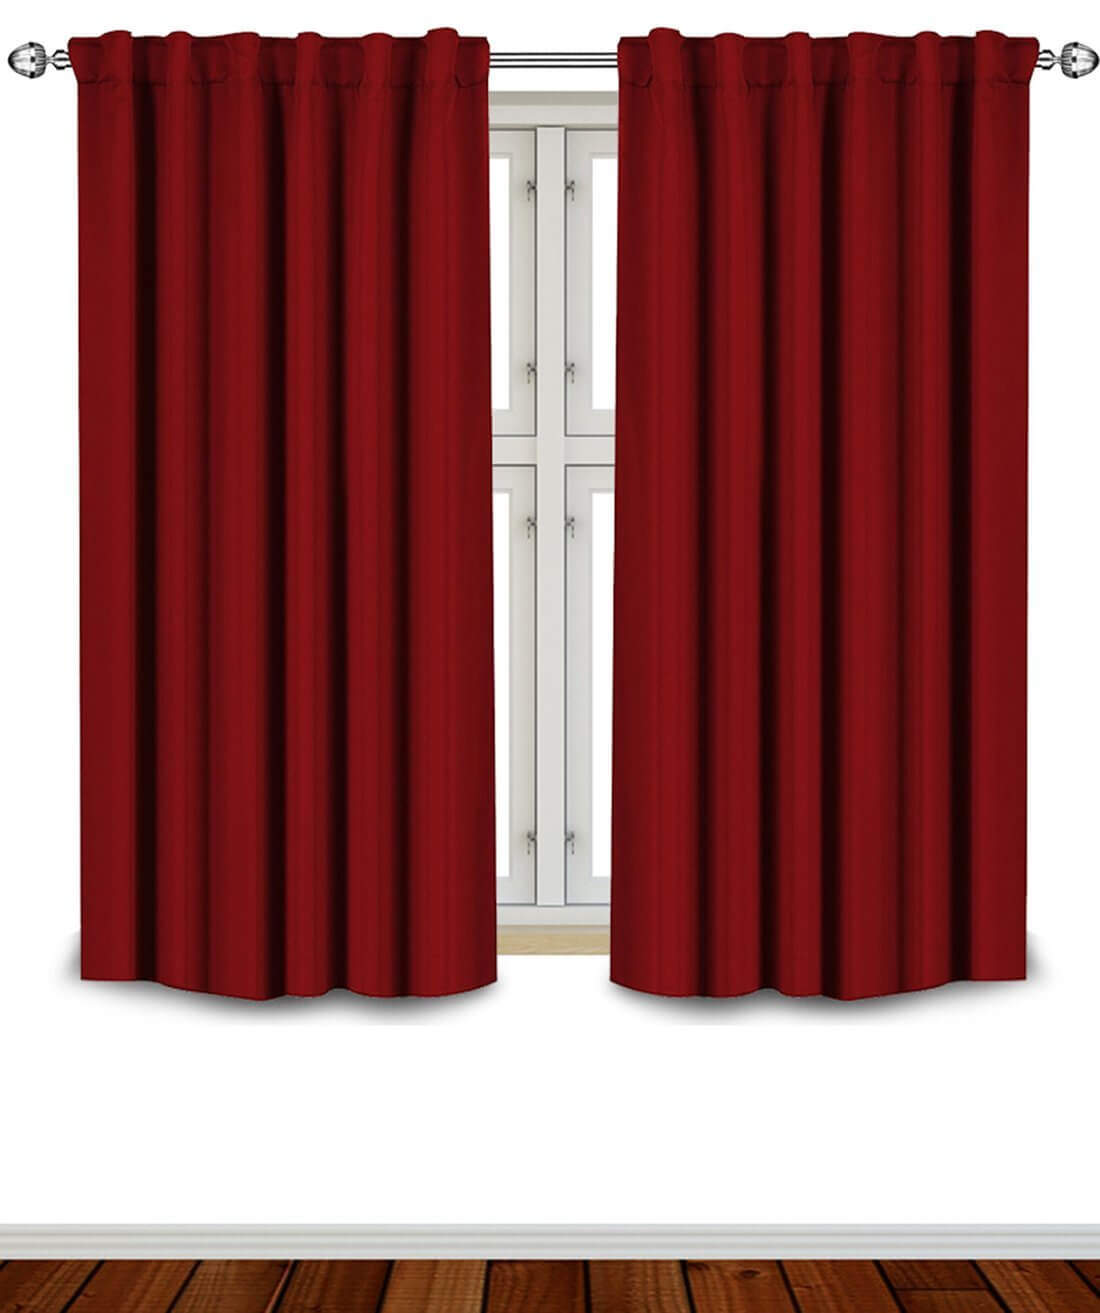 Utopia Bedding - Blackout Room Darkening and Thermal Insulating Window Curtains